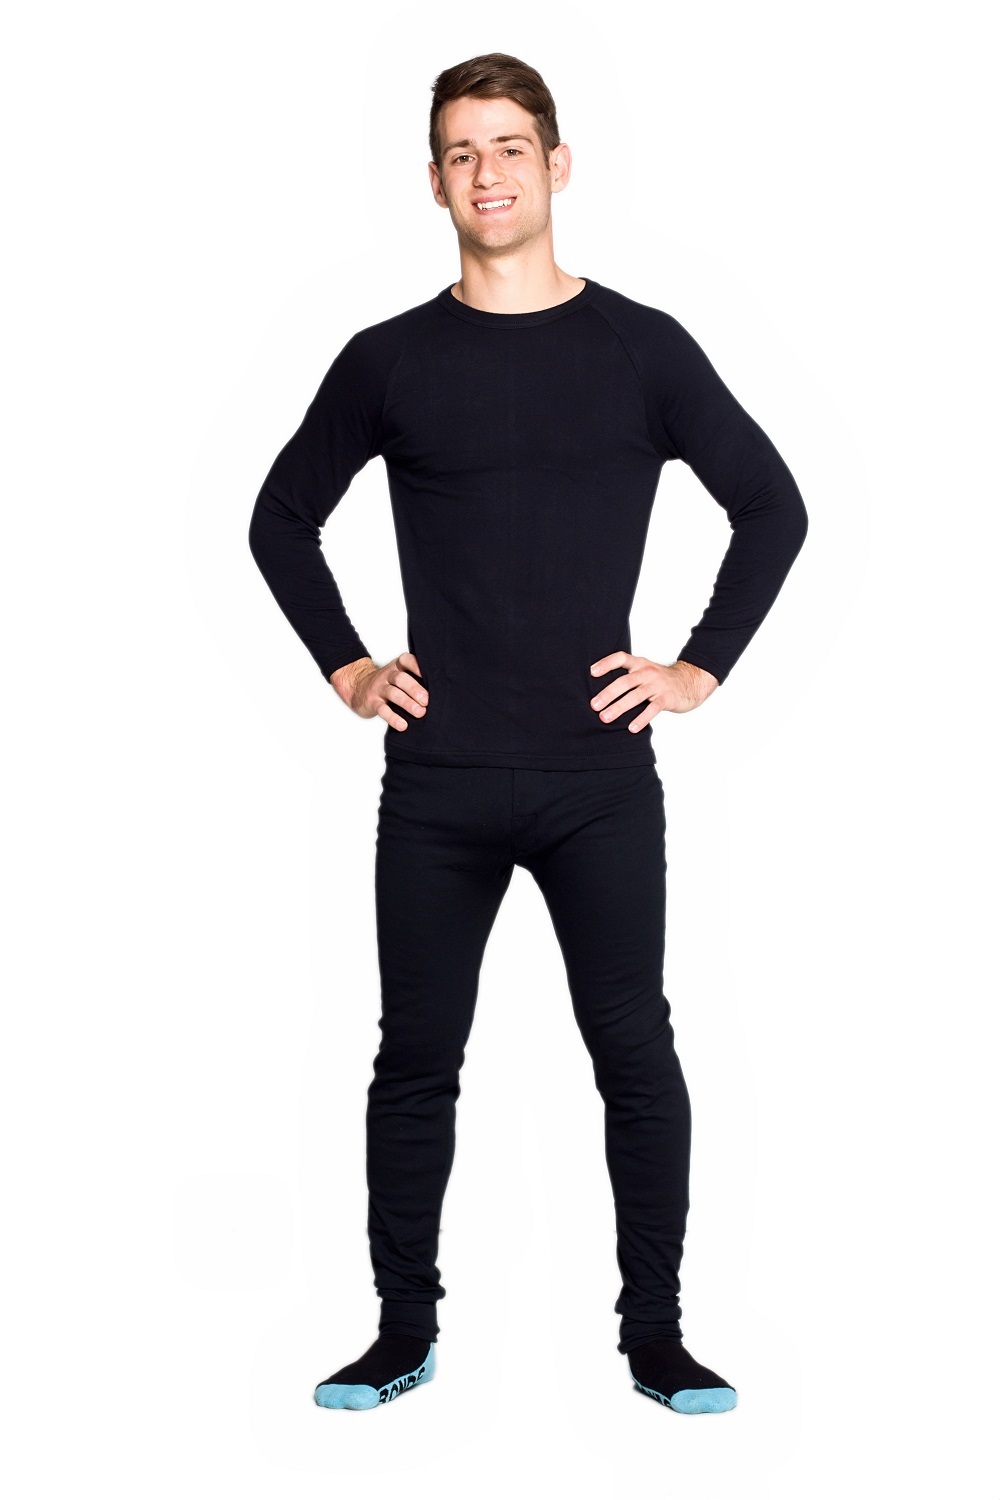 The Best Long Underwear Of 2023 Tested By GearLab, 51% OFF